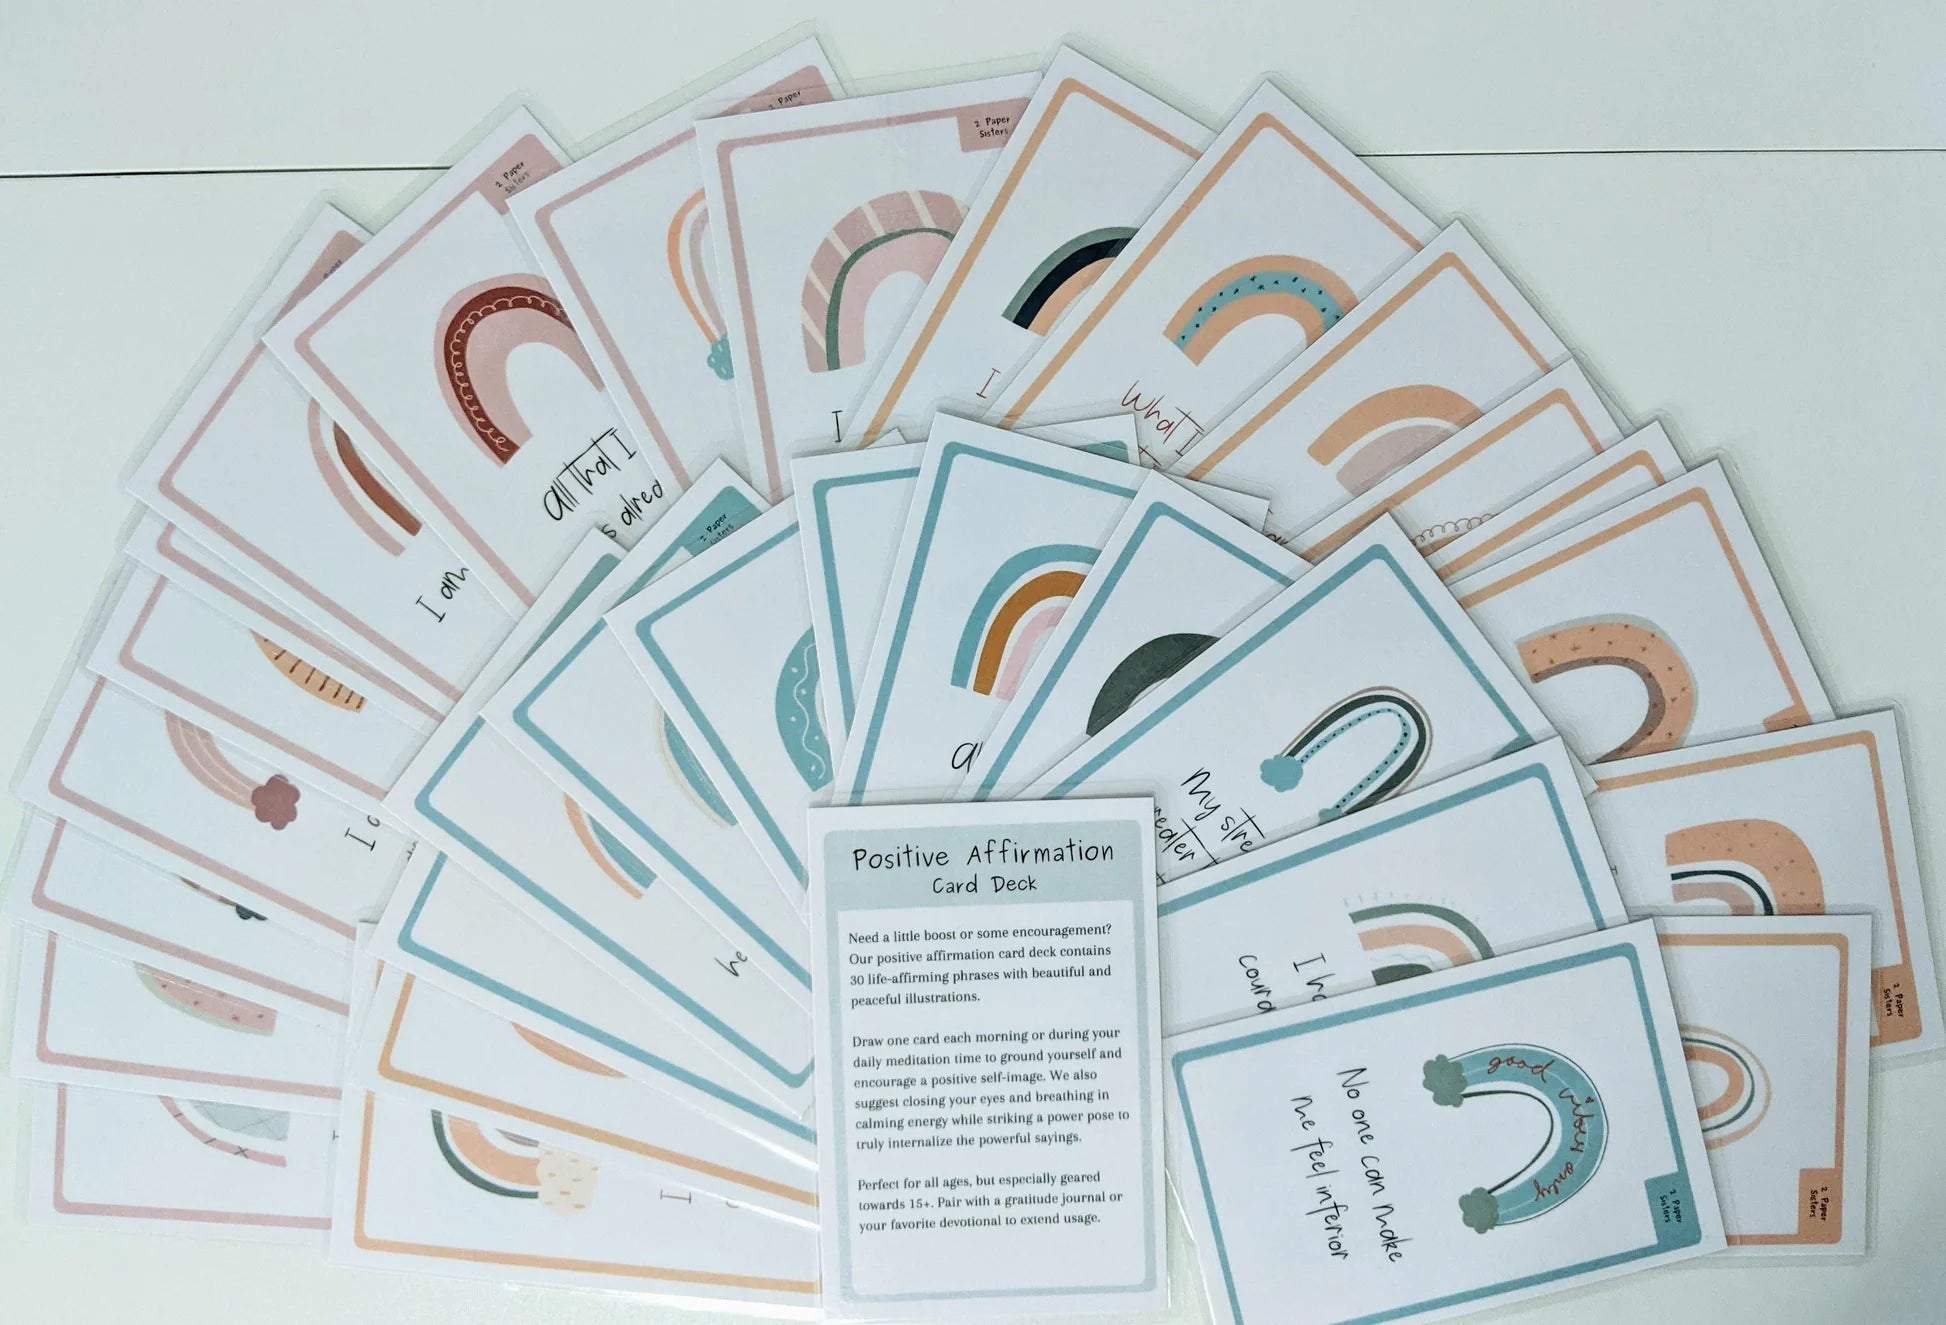 A display of the Positive Affirmation Card Deck.